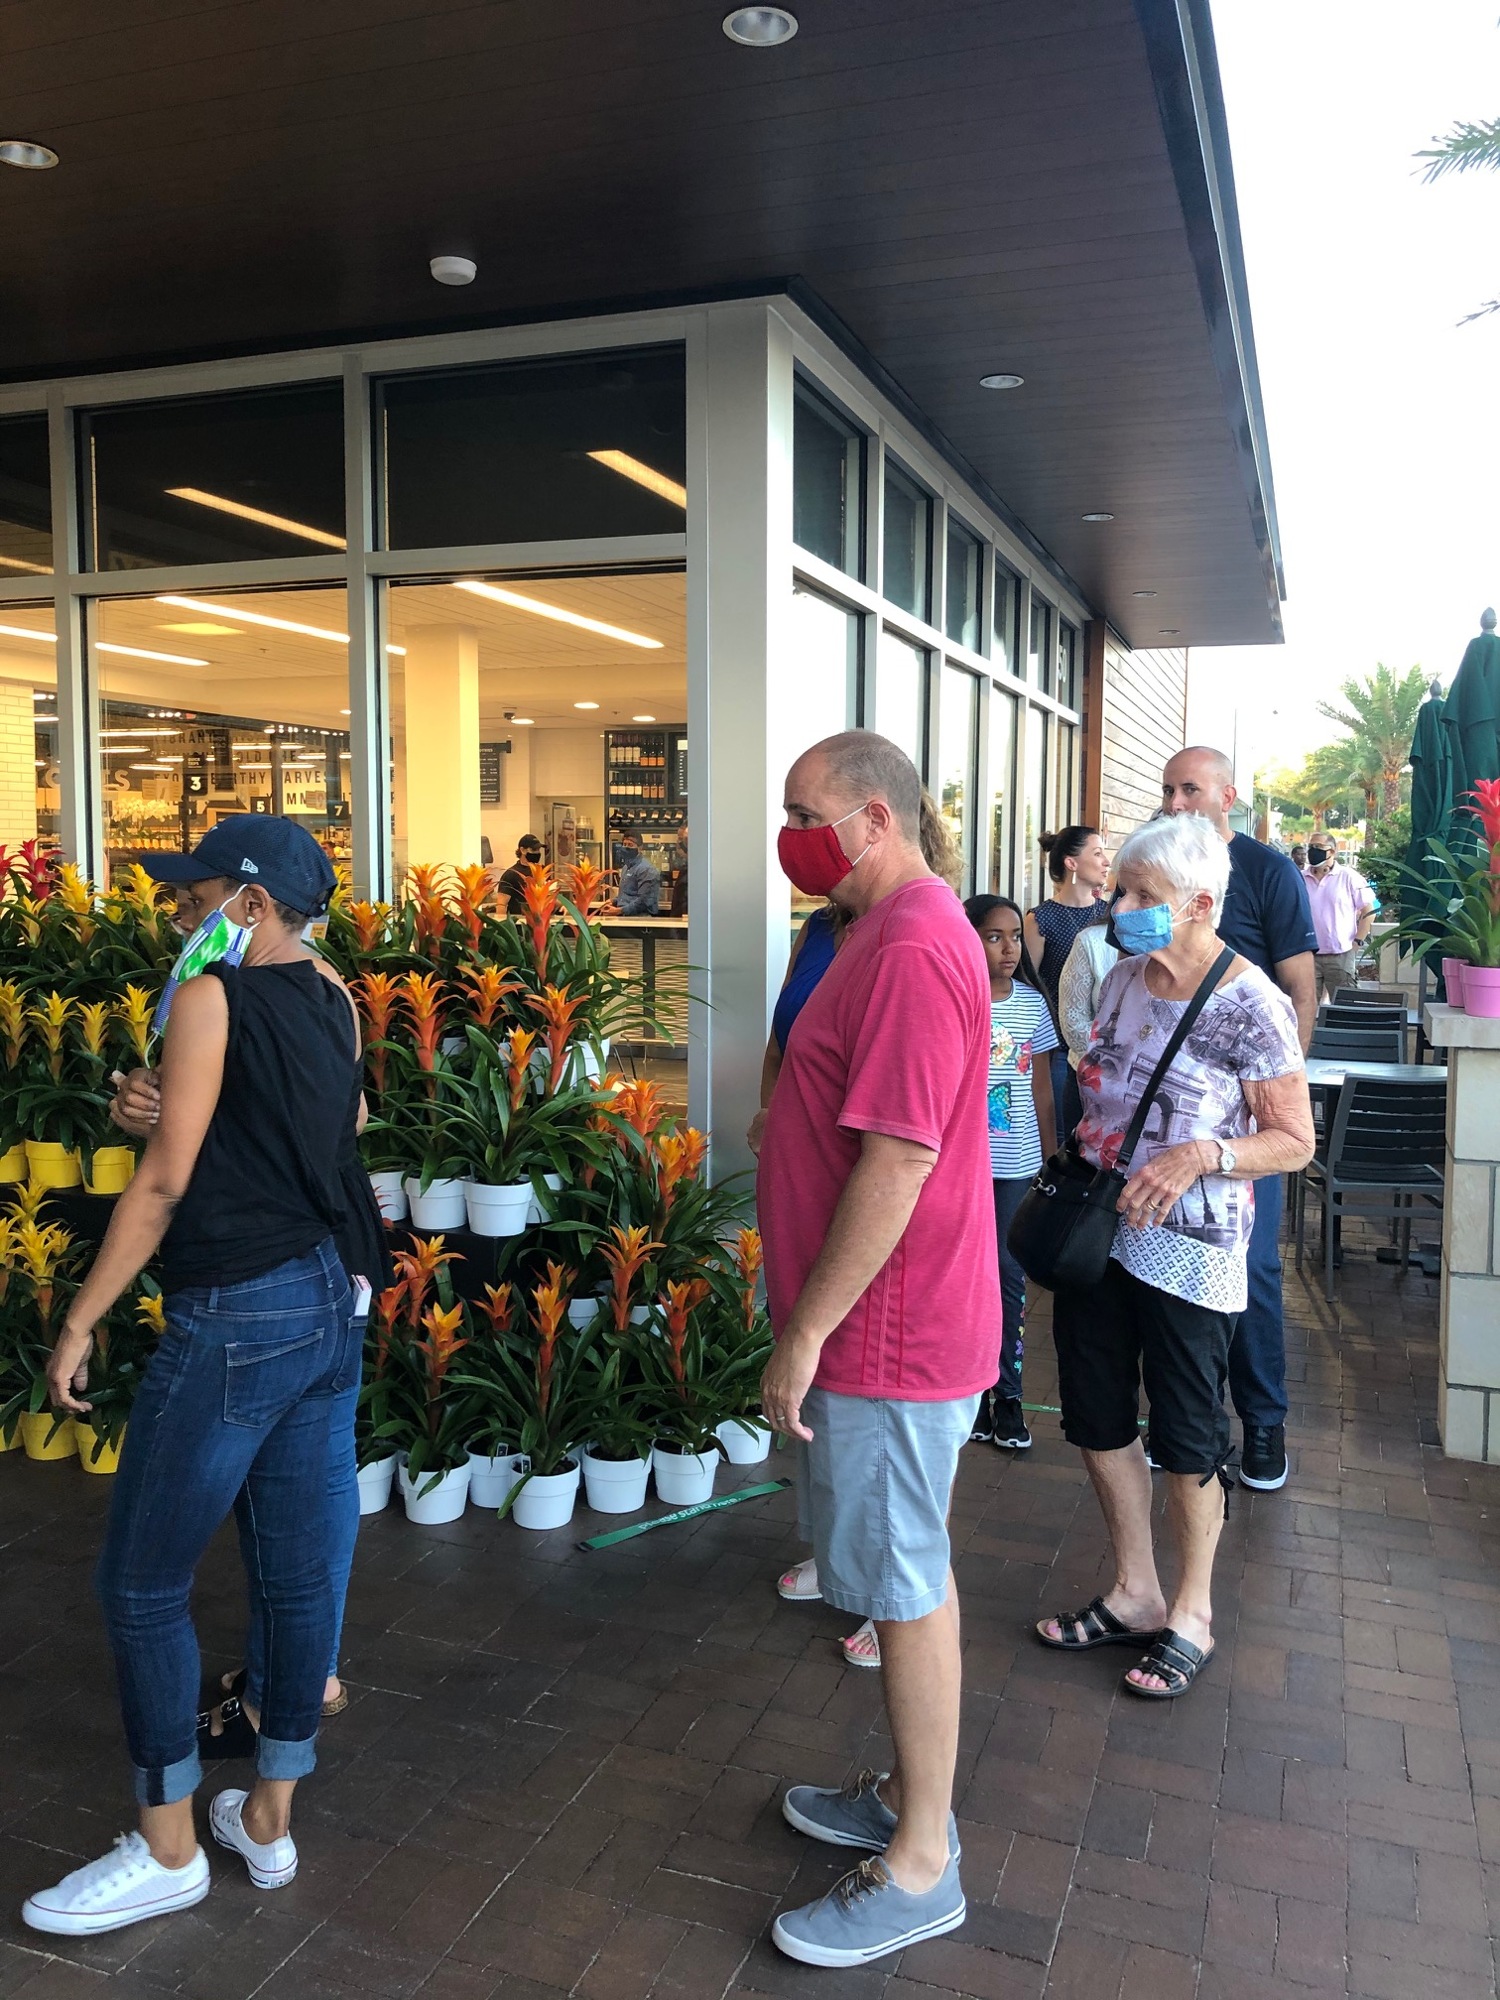 Shoppers wait to enter the GreenWise Market on June 20. (Photo by Karen Brune Mathis)